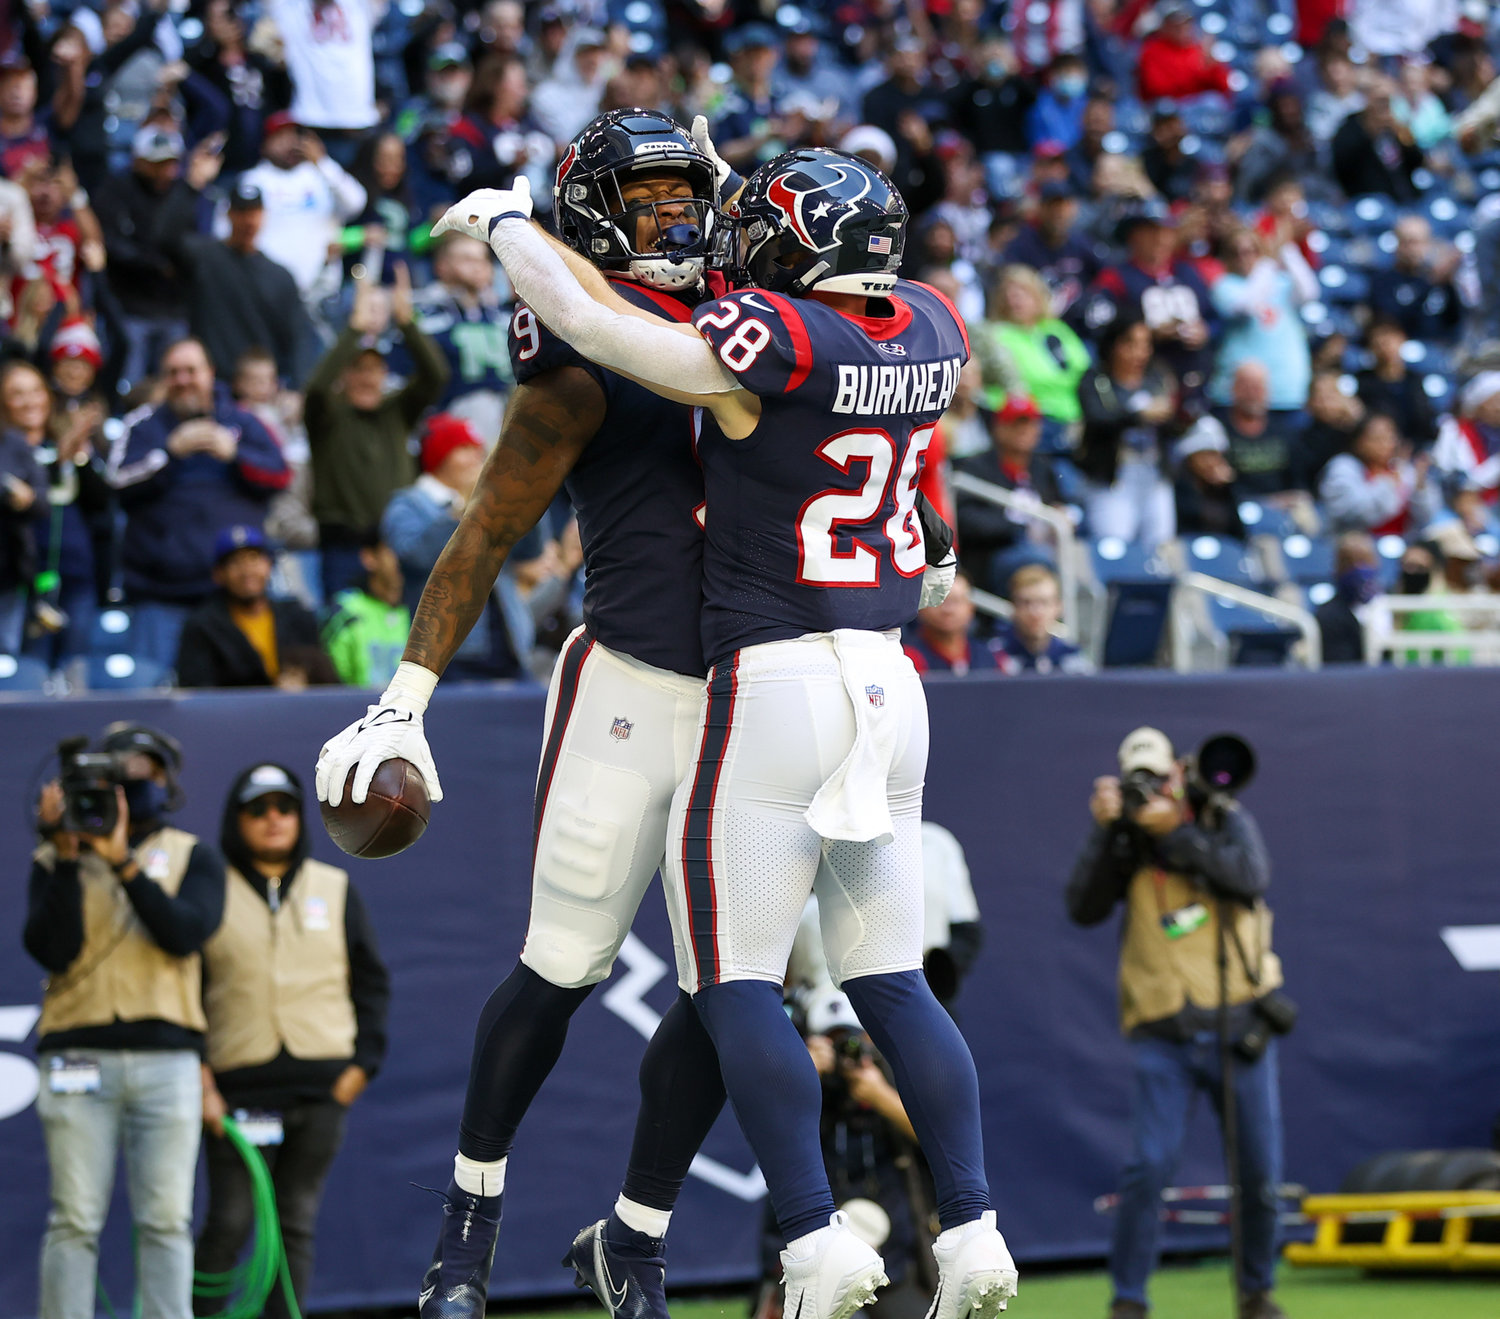 Houston Texans running back Rex Burkhead (28) congratulates tight end Brevin Jordan (9) after a touchdown during the first half of an NFL game between the Seahawks and the Texans on December 12, 2021 in Houston, Texas.